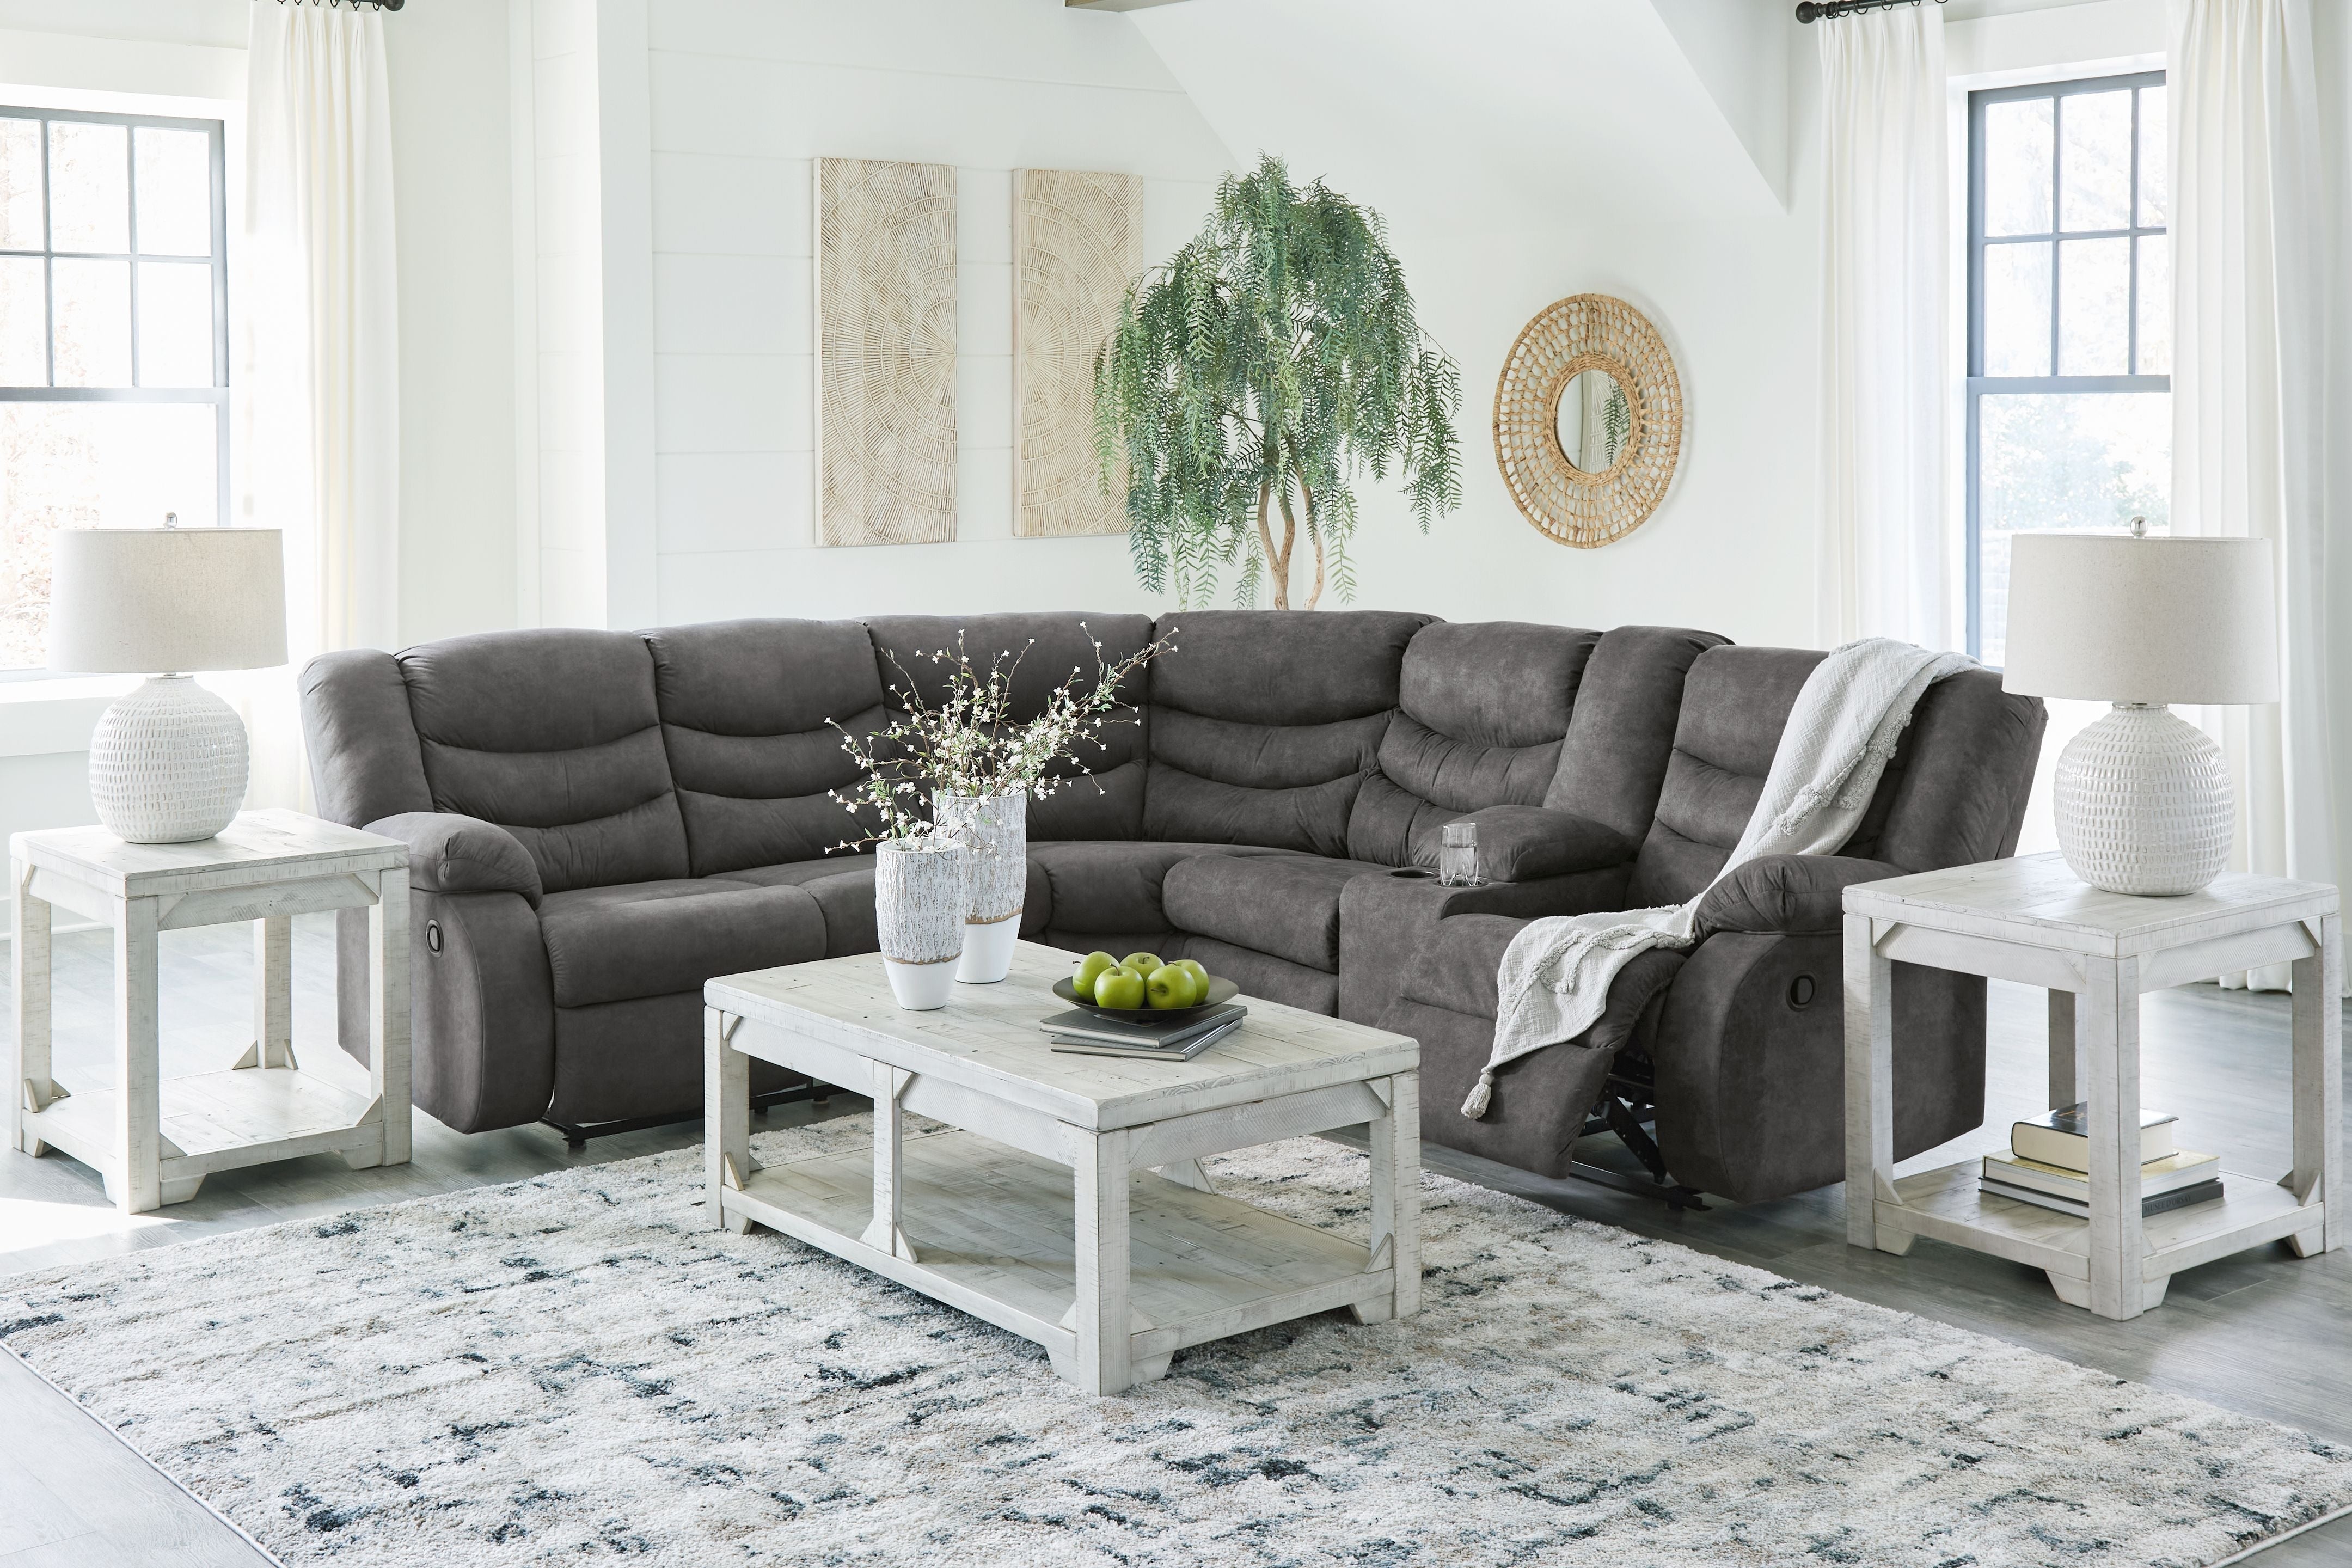 Partymate Faux Leather Reclining Sectional-Reclining Sectionals-American Furniture Outlet